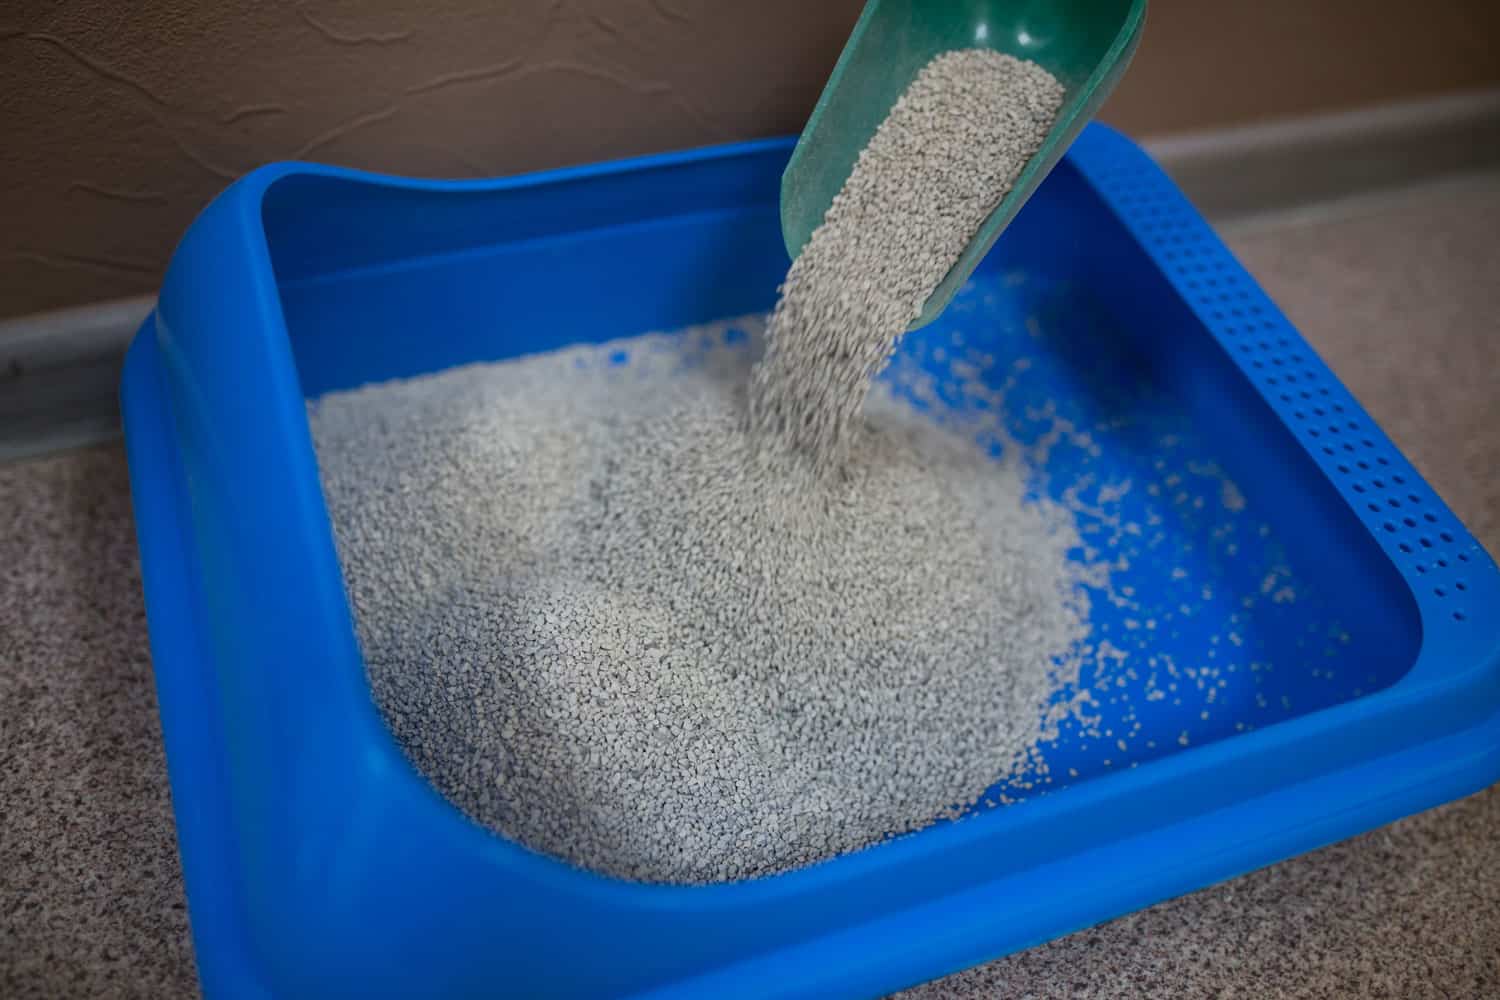 Pouring cat litter onto blue litter box - can you litter box train a chihuahua